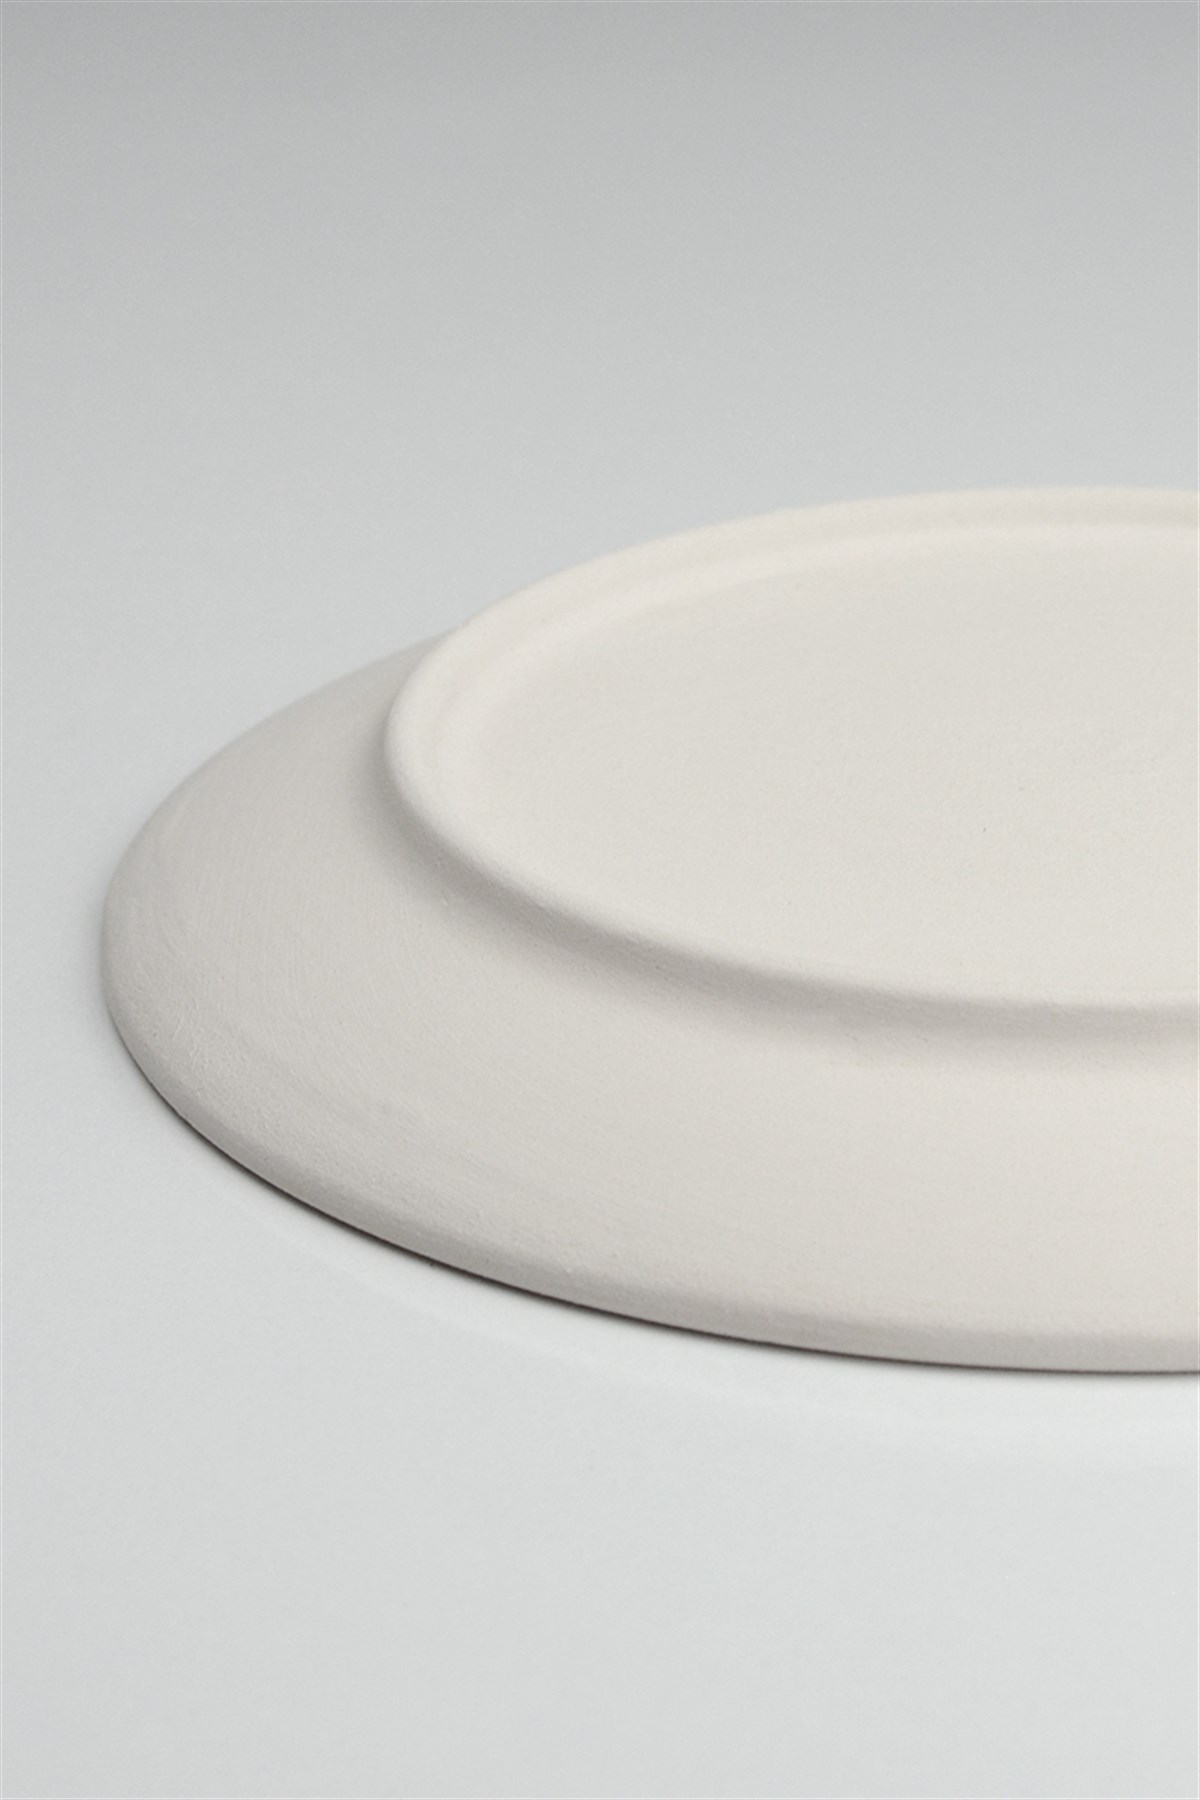 Flat Plate Tile Bisque